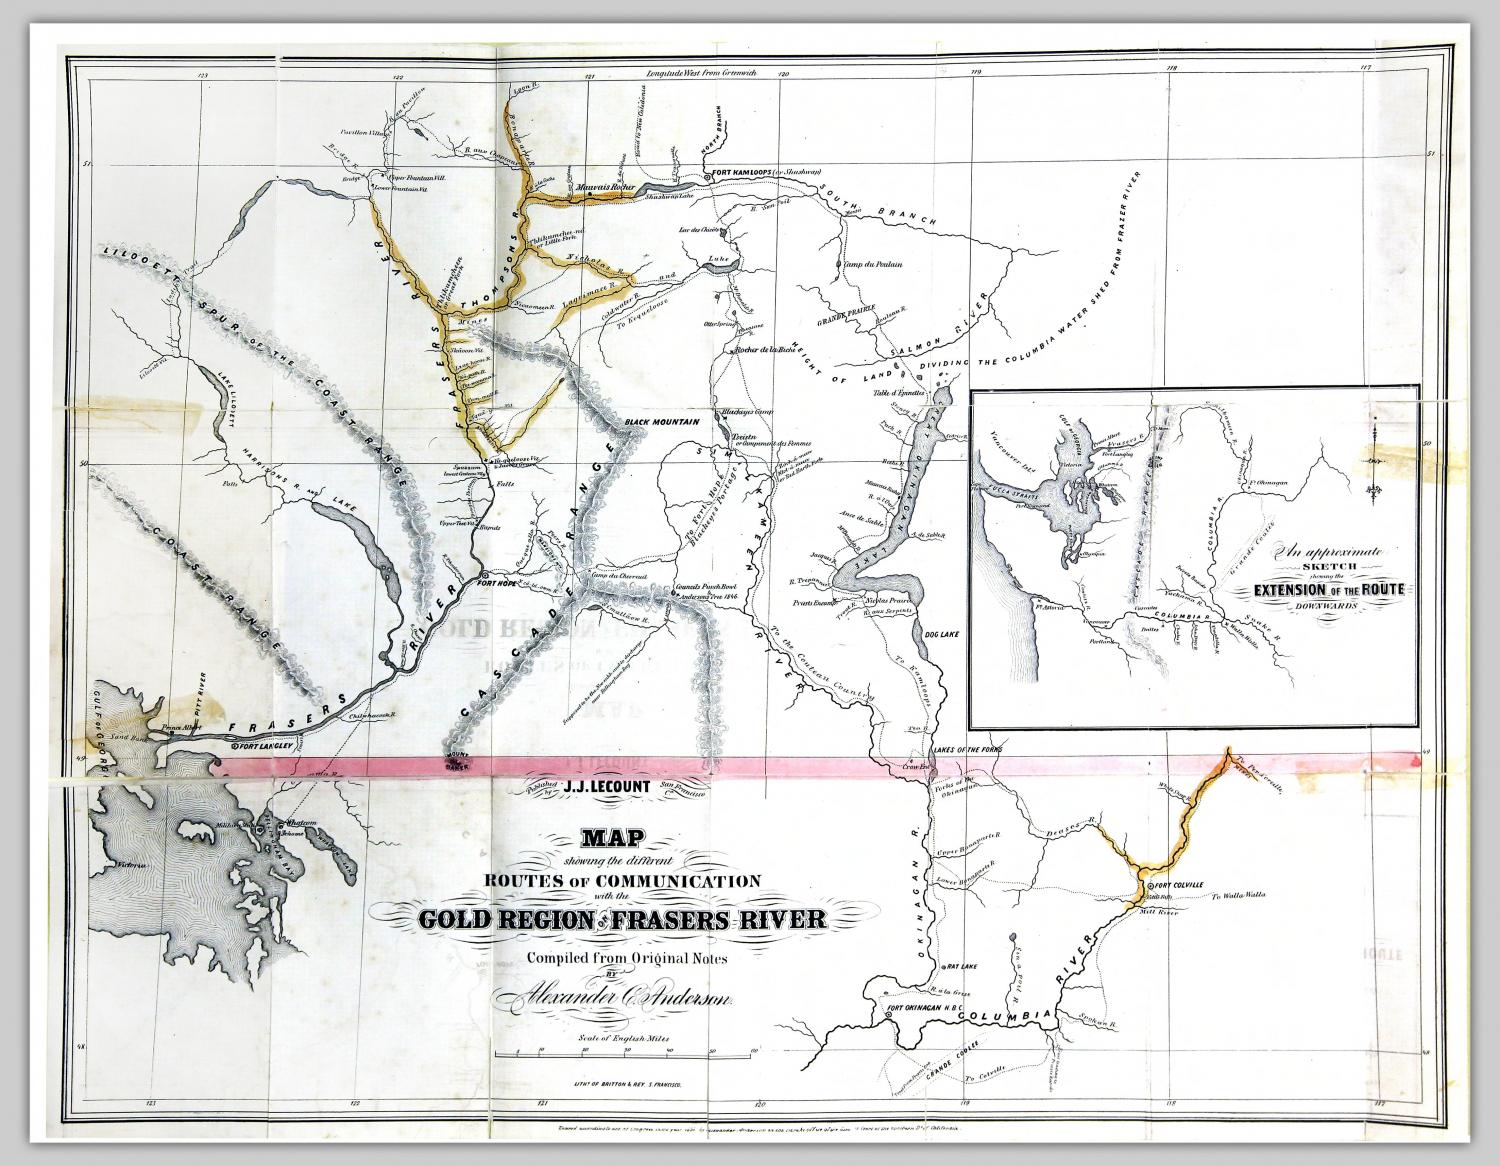 Map showing the different routes of communication with the gold region on Frasers River compiled from original notes by Alexander Anderson